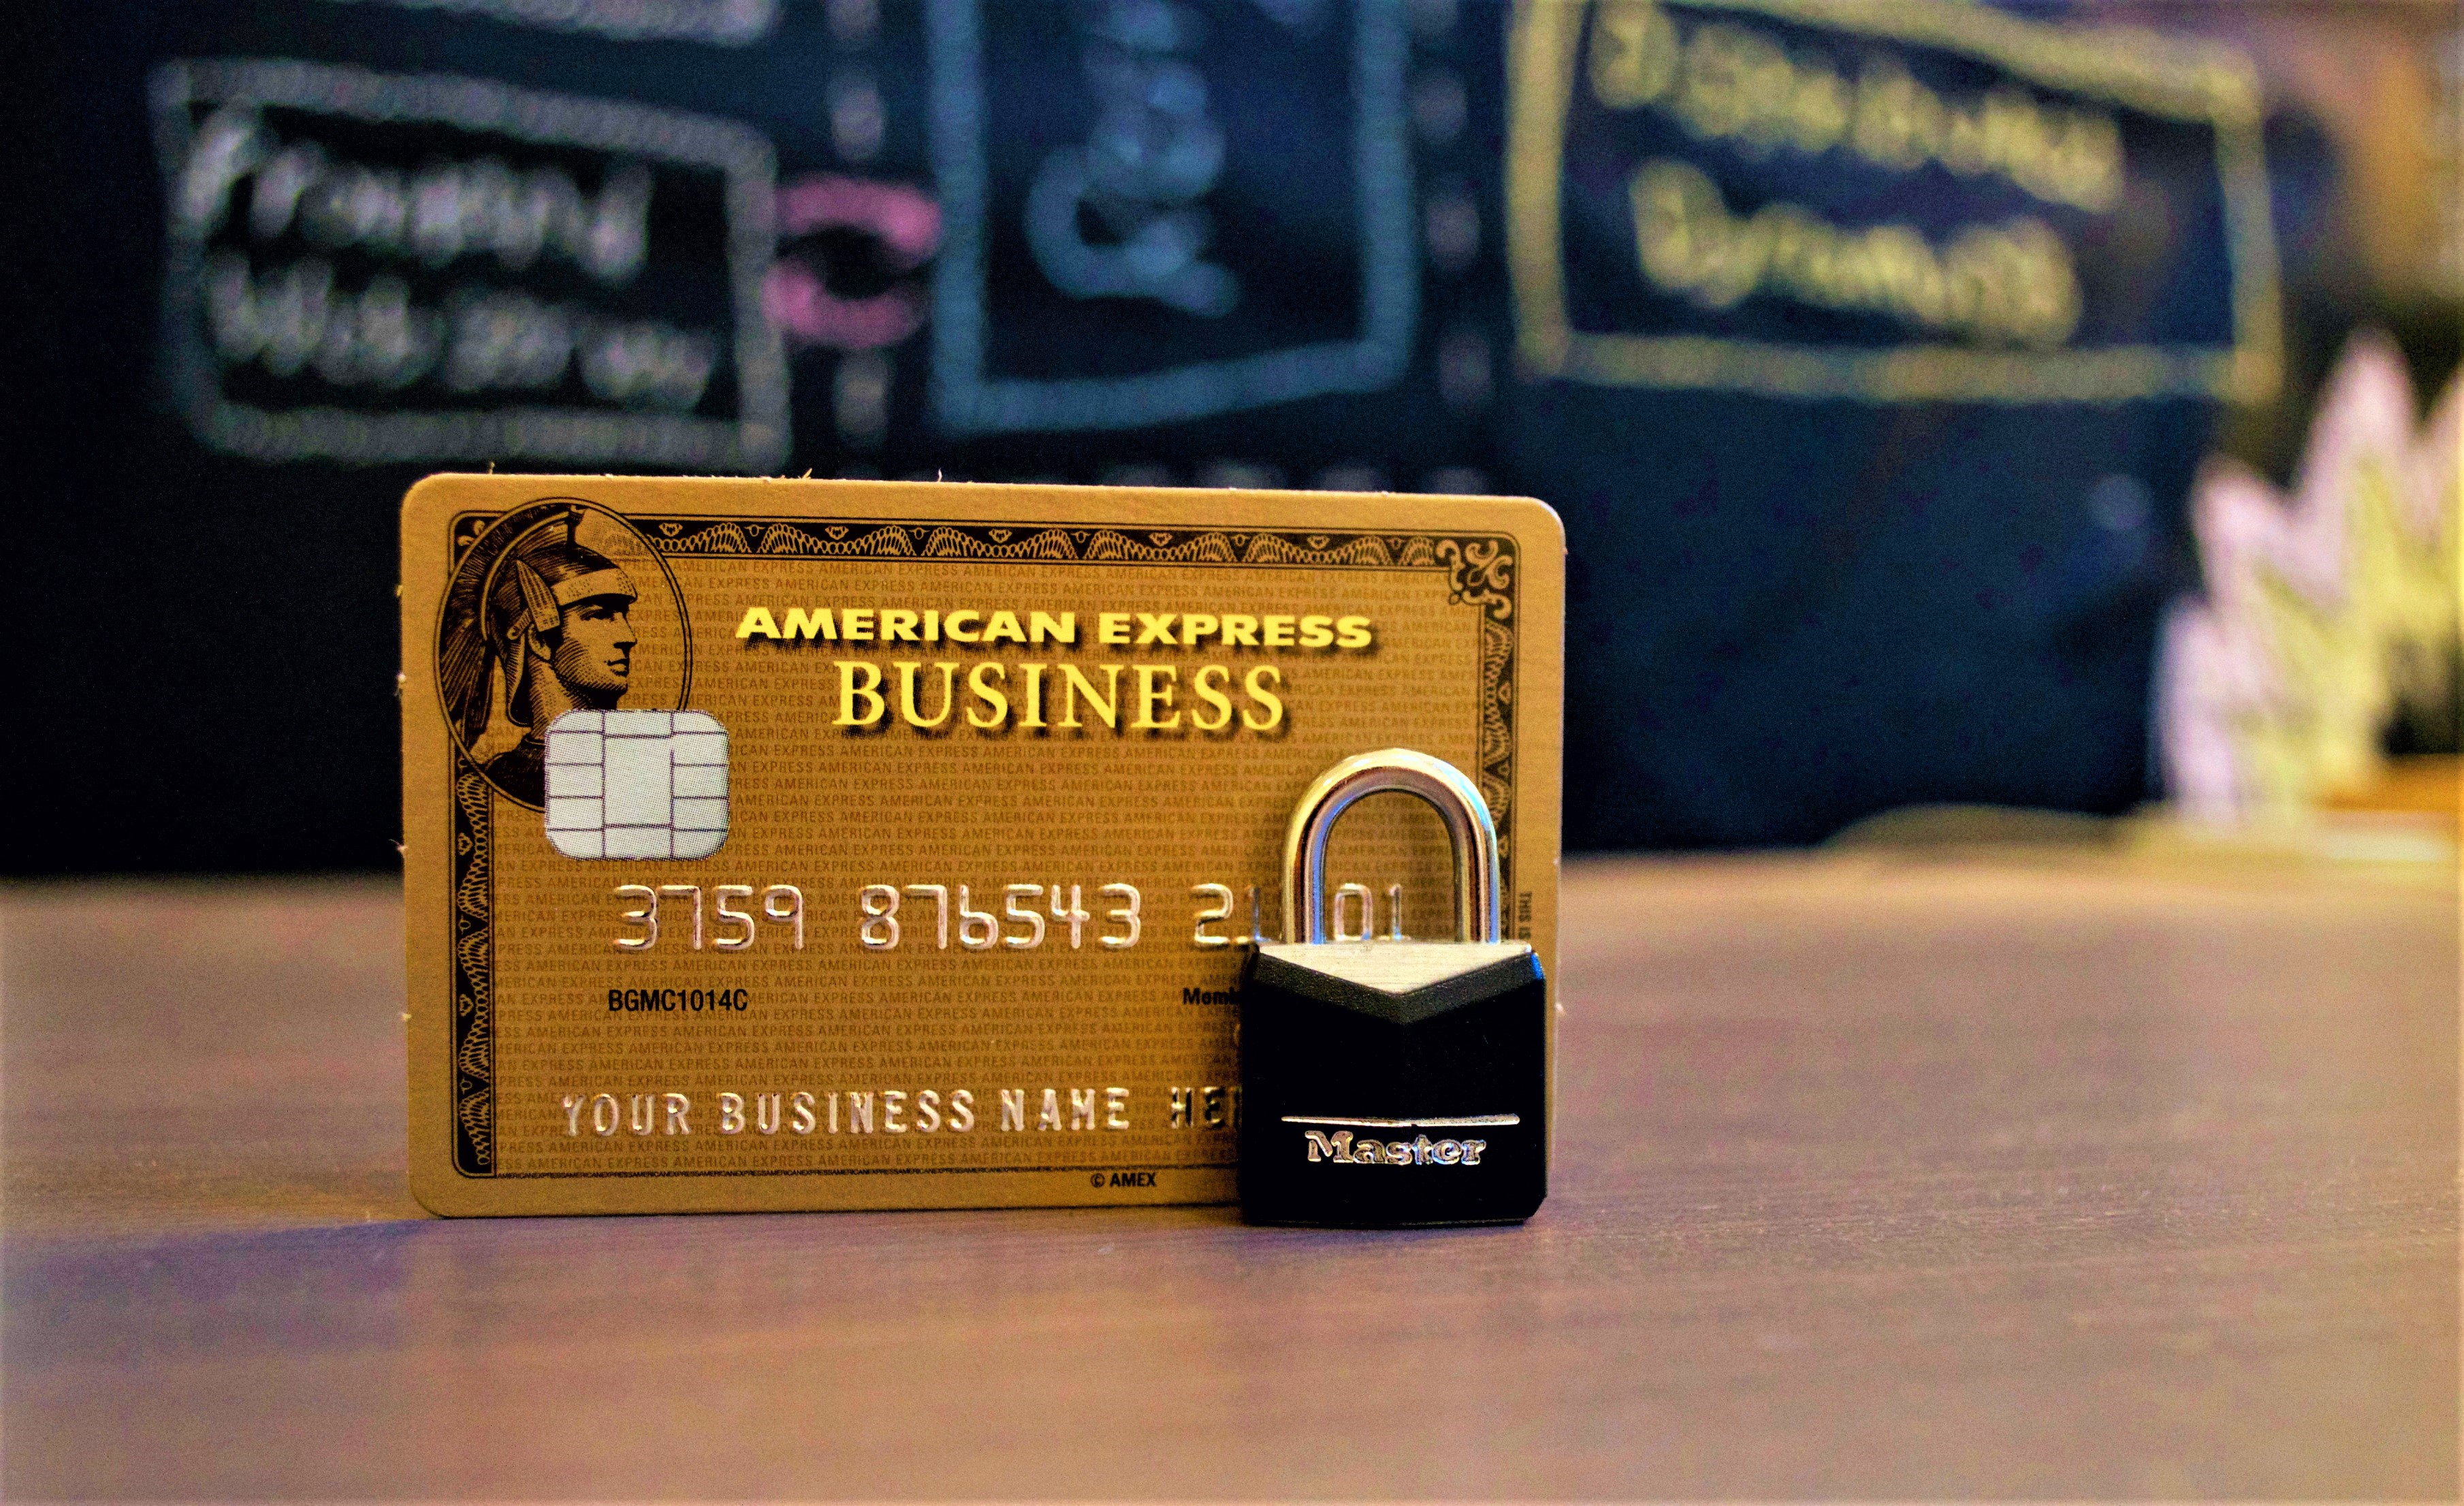 AmEx posts strong Q4 earnings boosted by record card spending